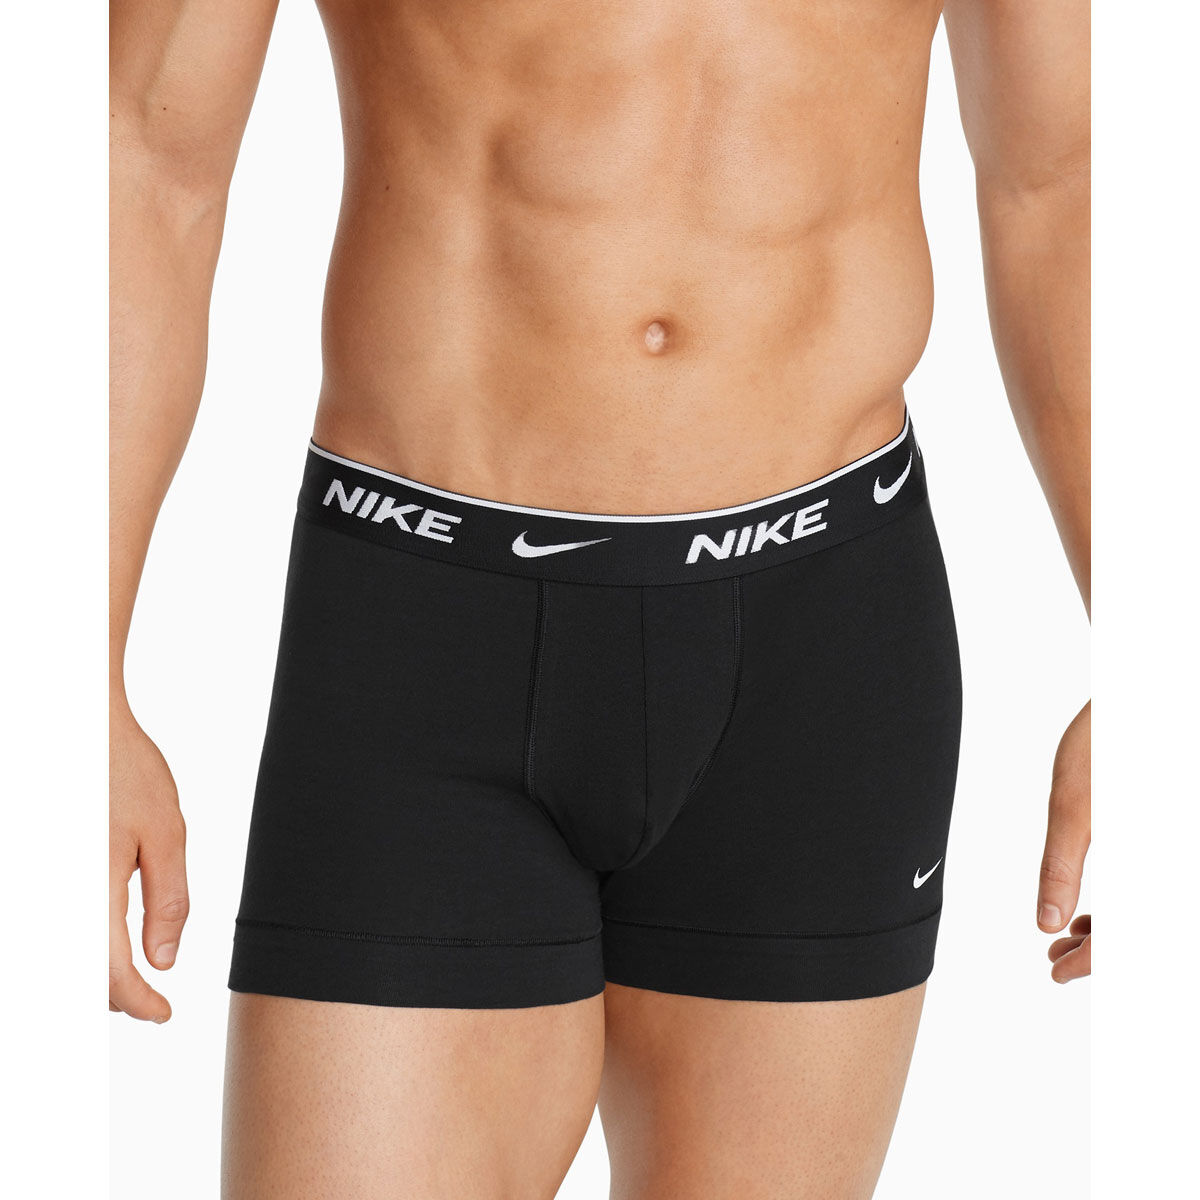 Nike Mens Everyday Cotton Trunks 3 Pack